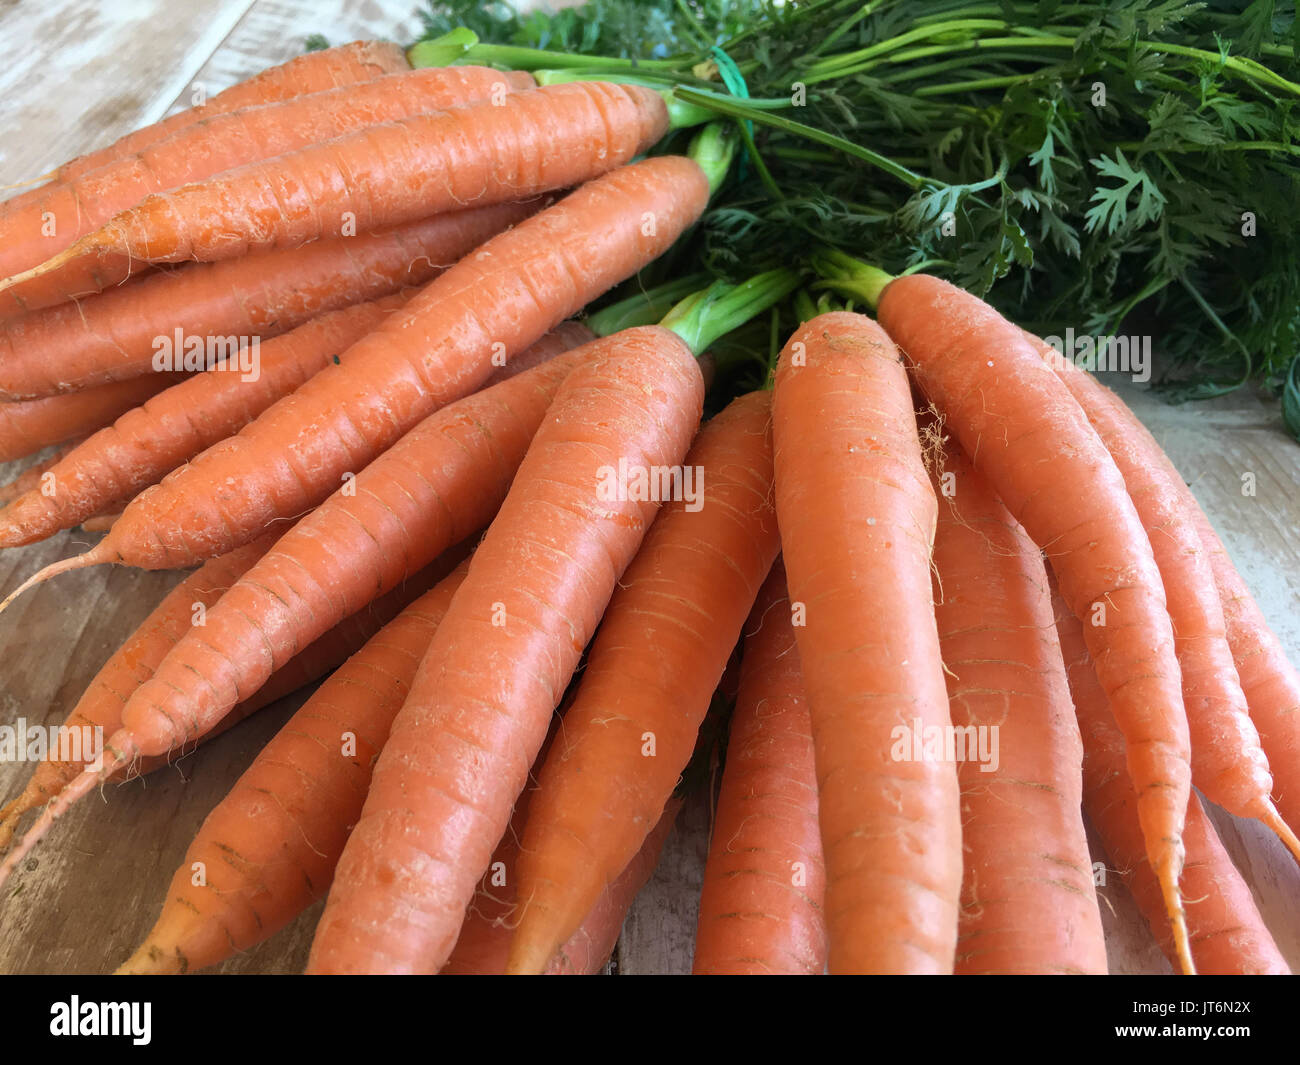 Carrots, freshly dug still with the tops, carrot greens. Stock Photo